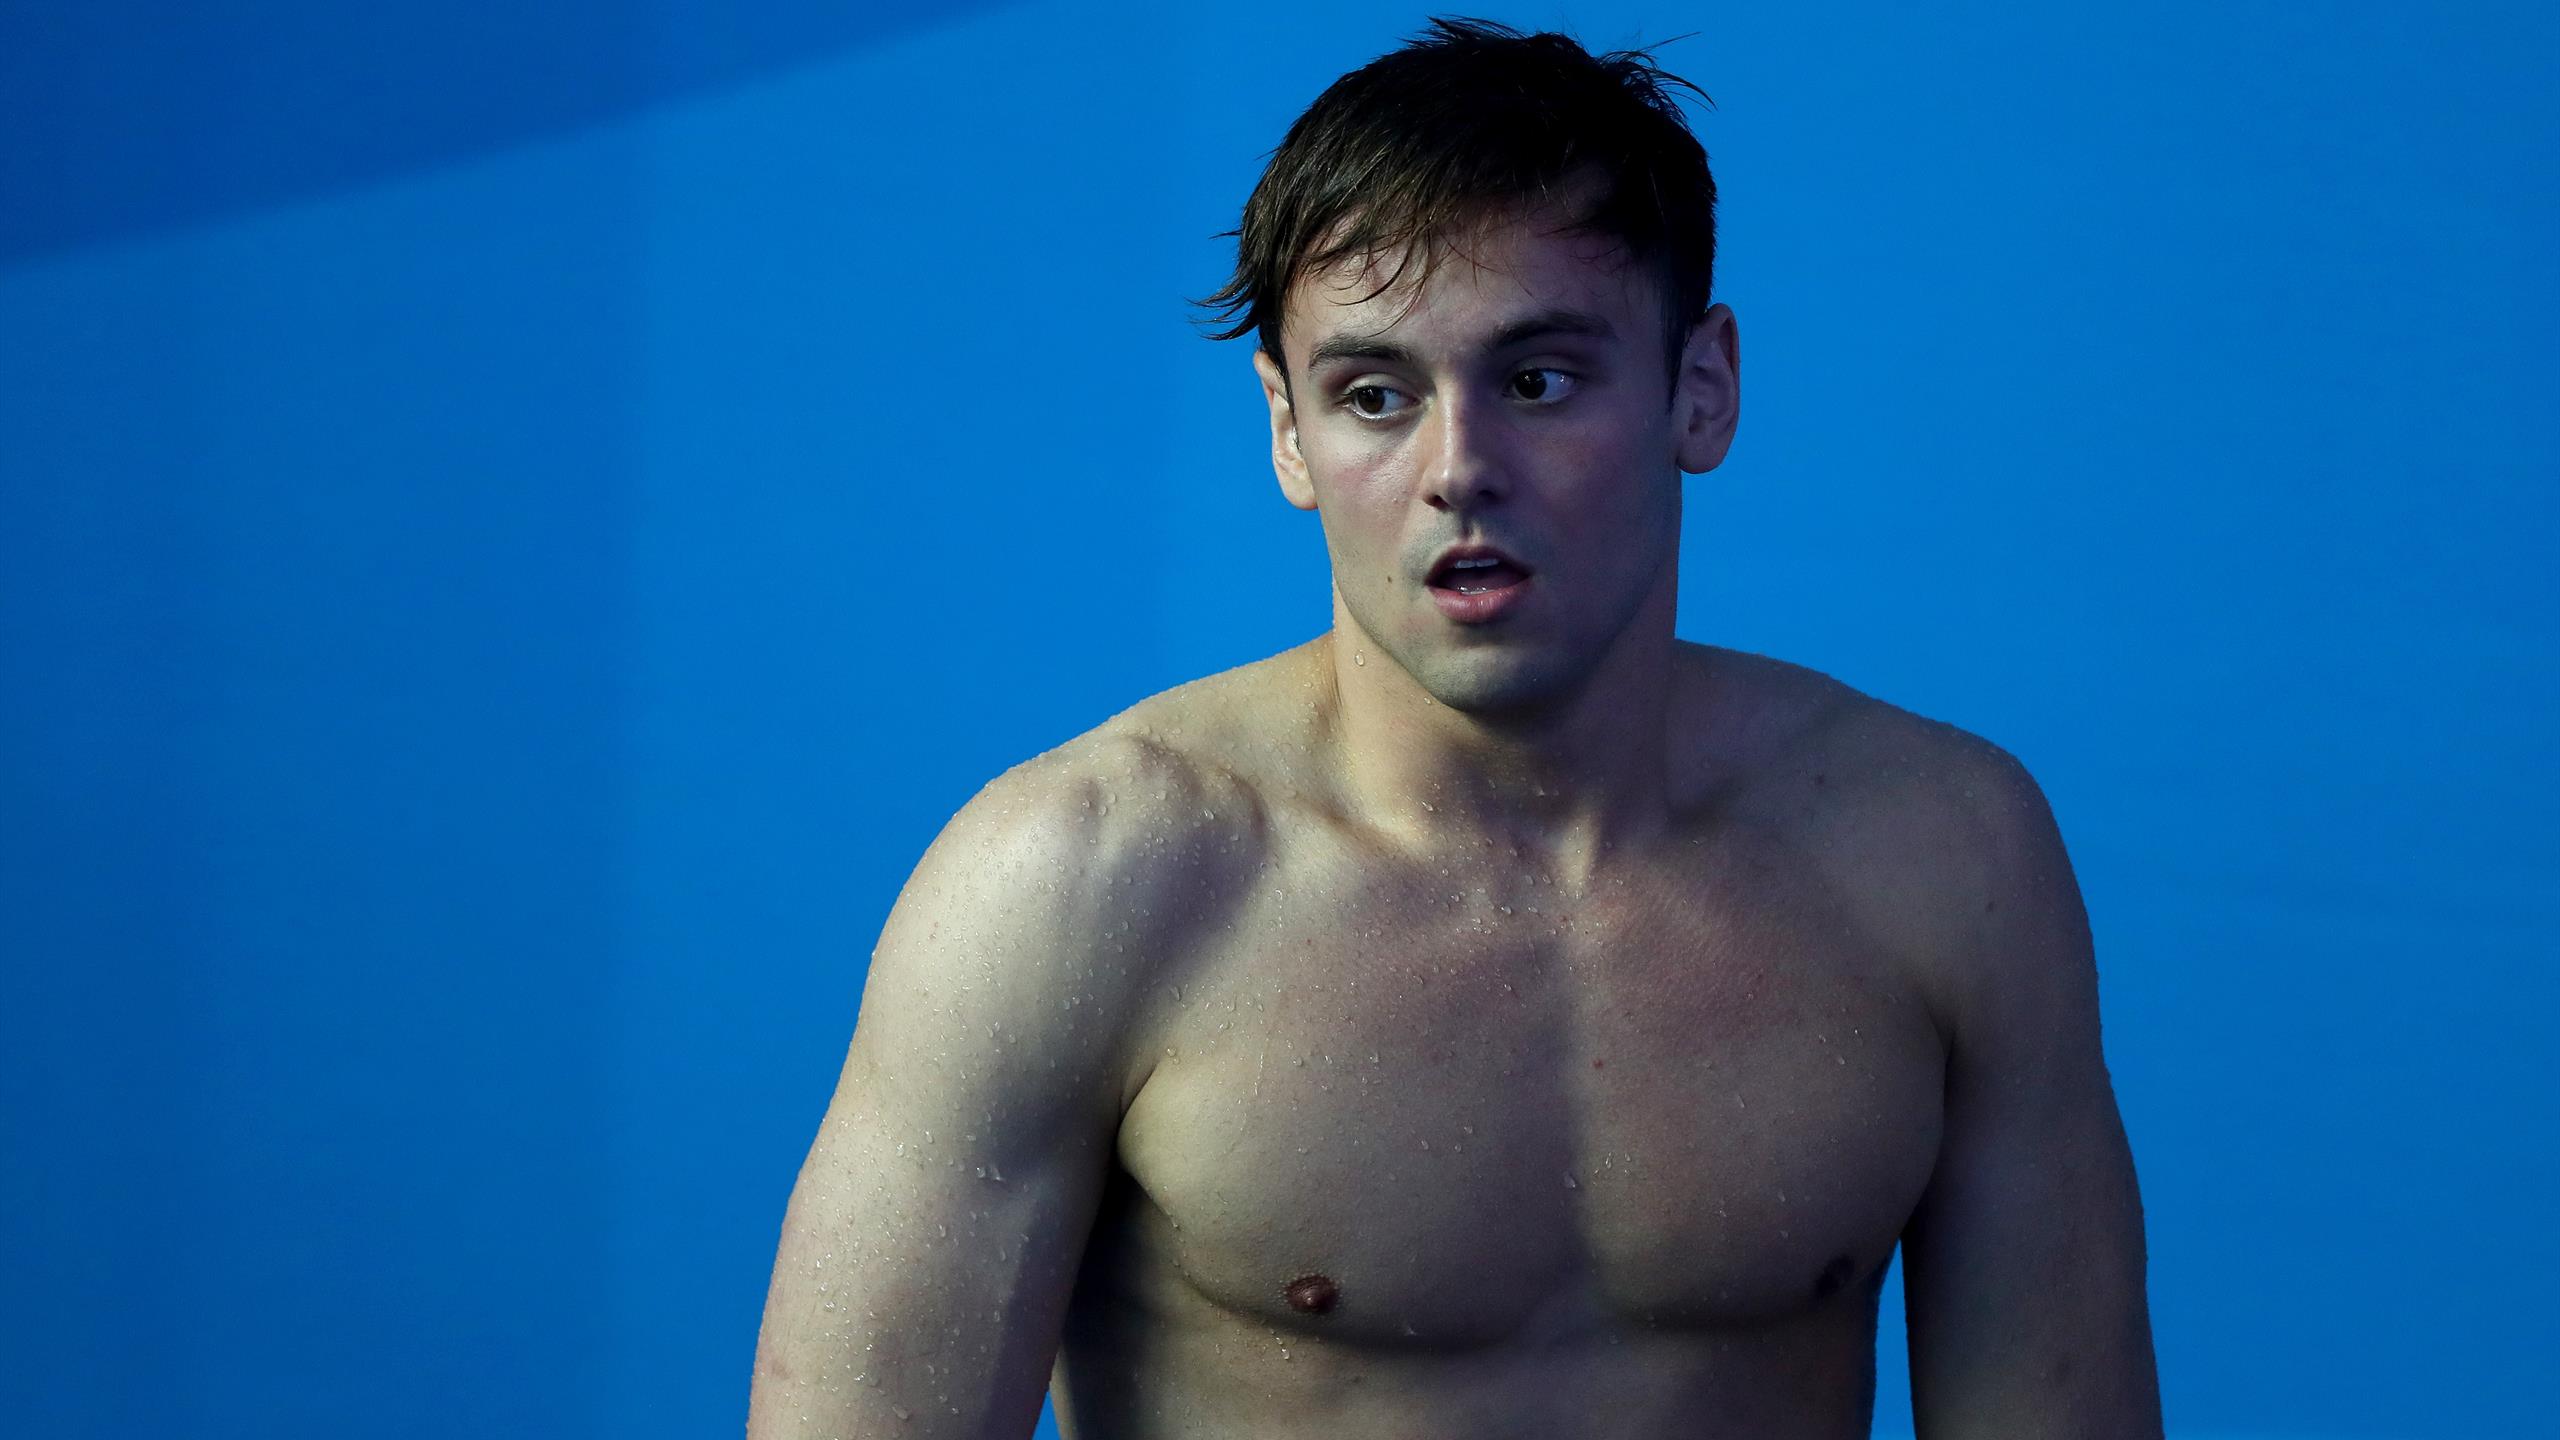 Tokyo 2020 - 'I'm the granddad of the sport' GB's Tom Daley looks ahead to the Olympics